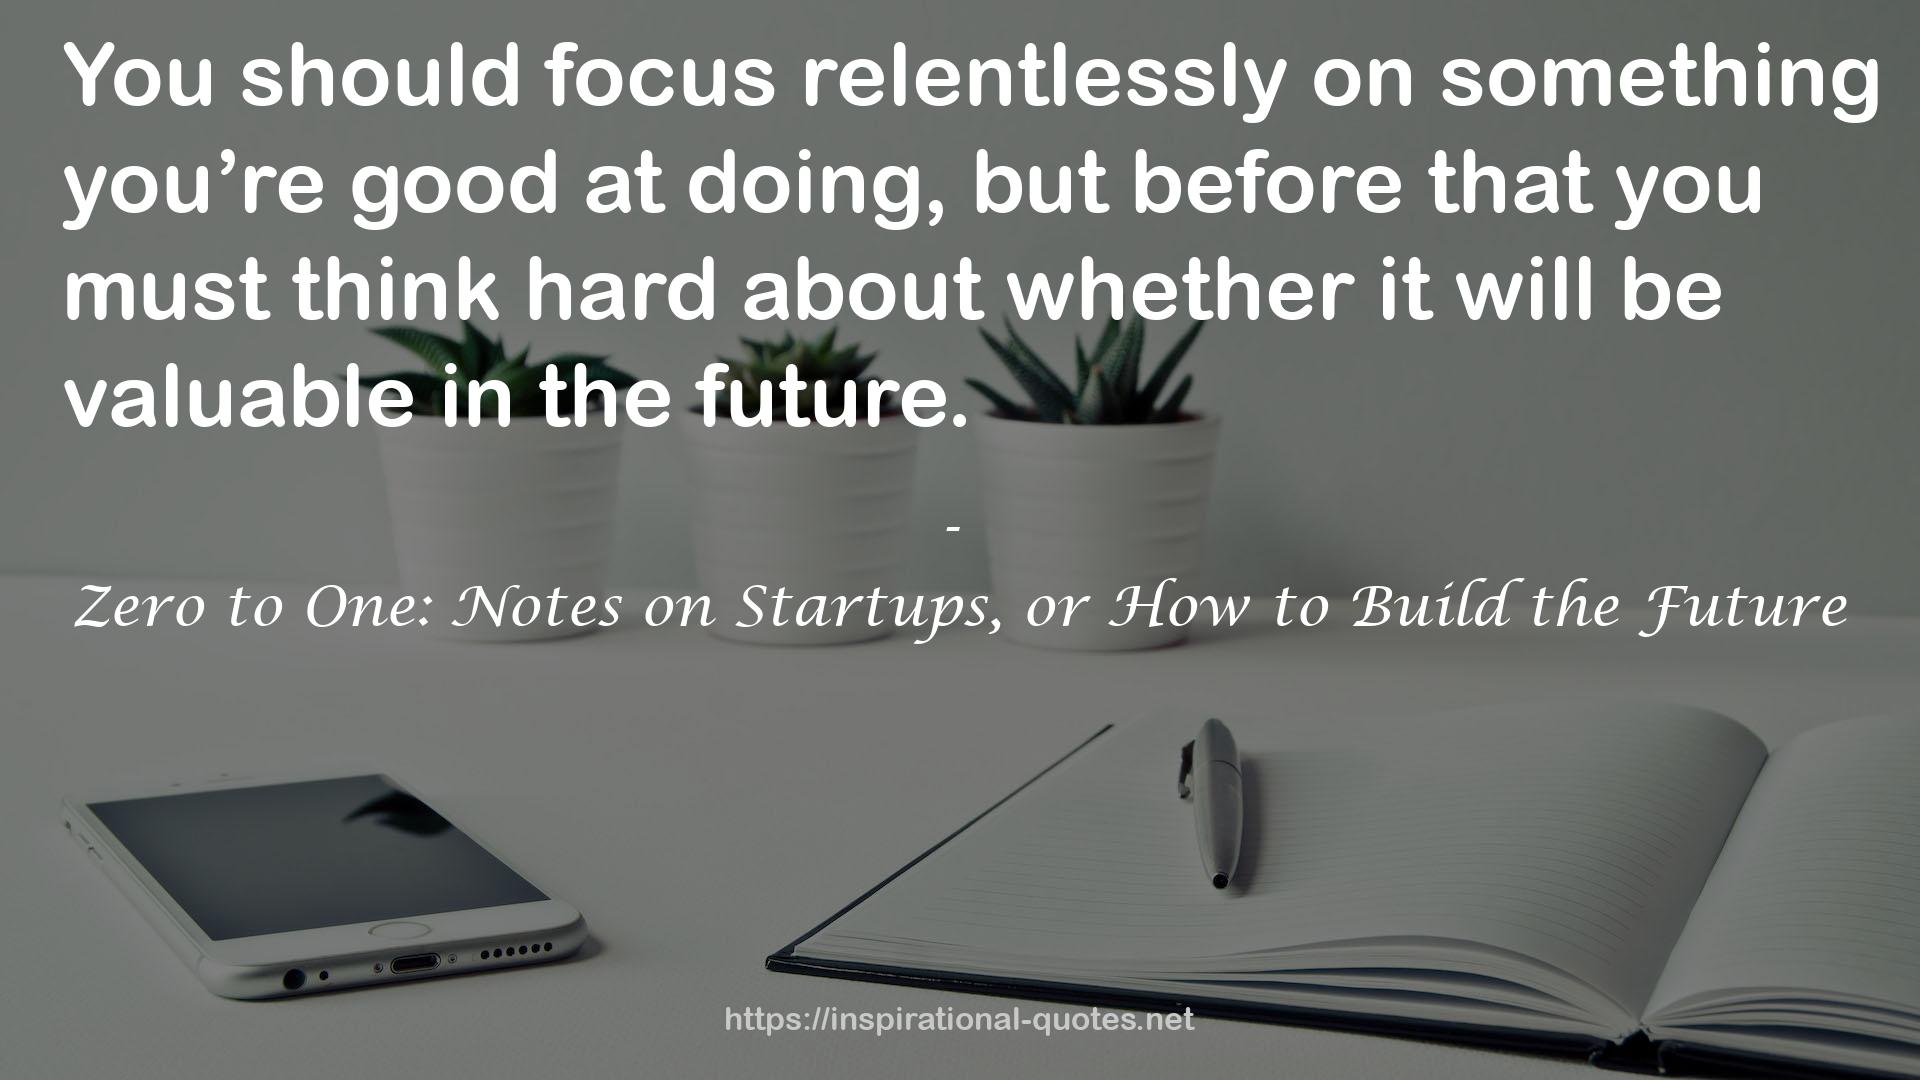 Zero to One: Notes on Startups, or How to Build the Future QUOTES